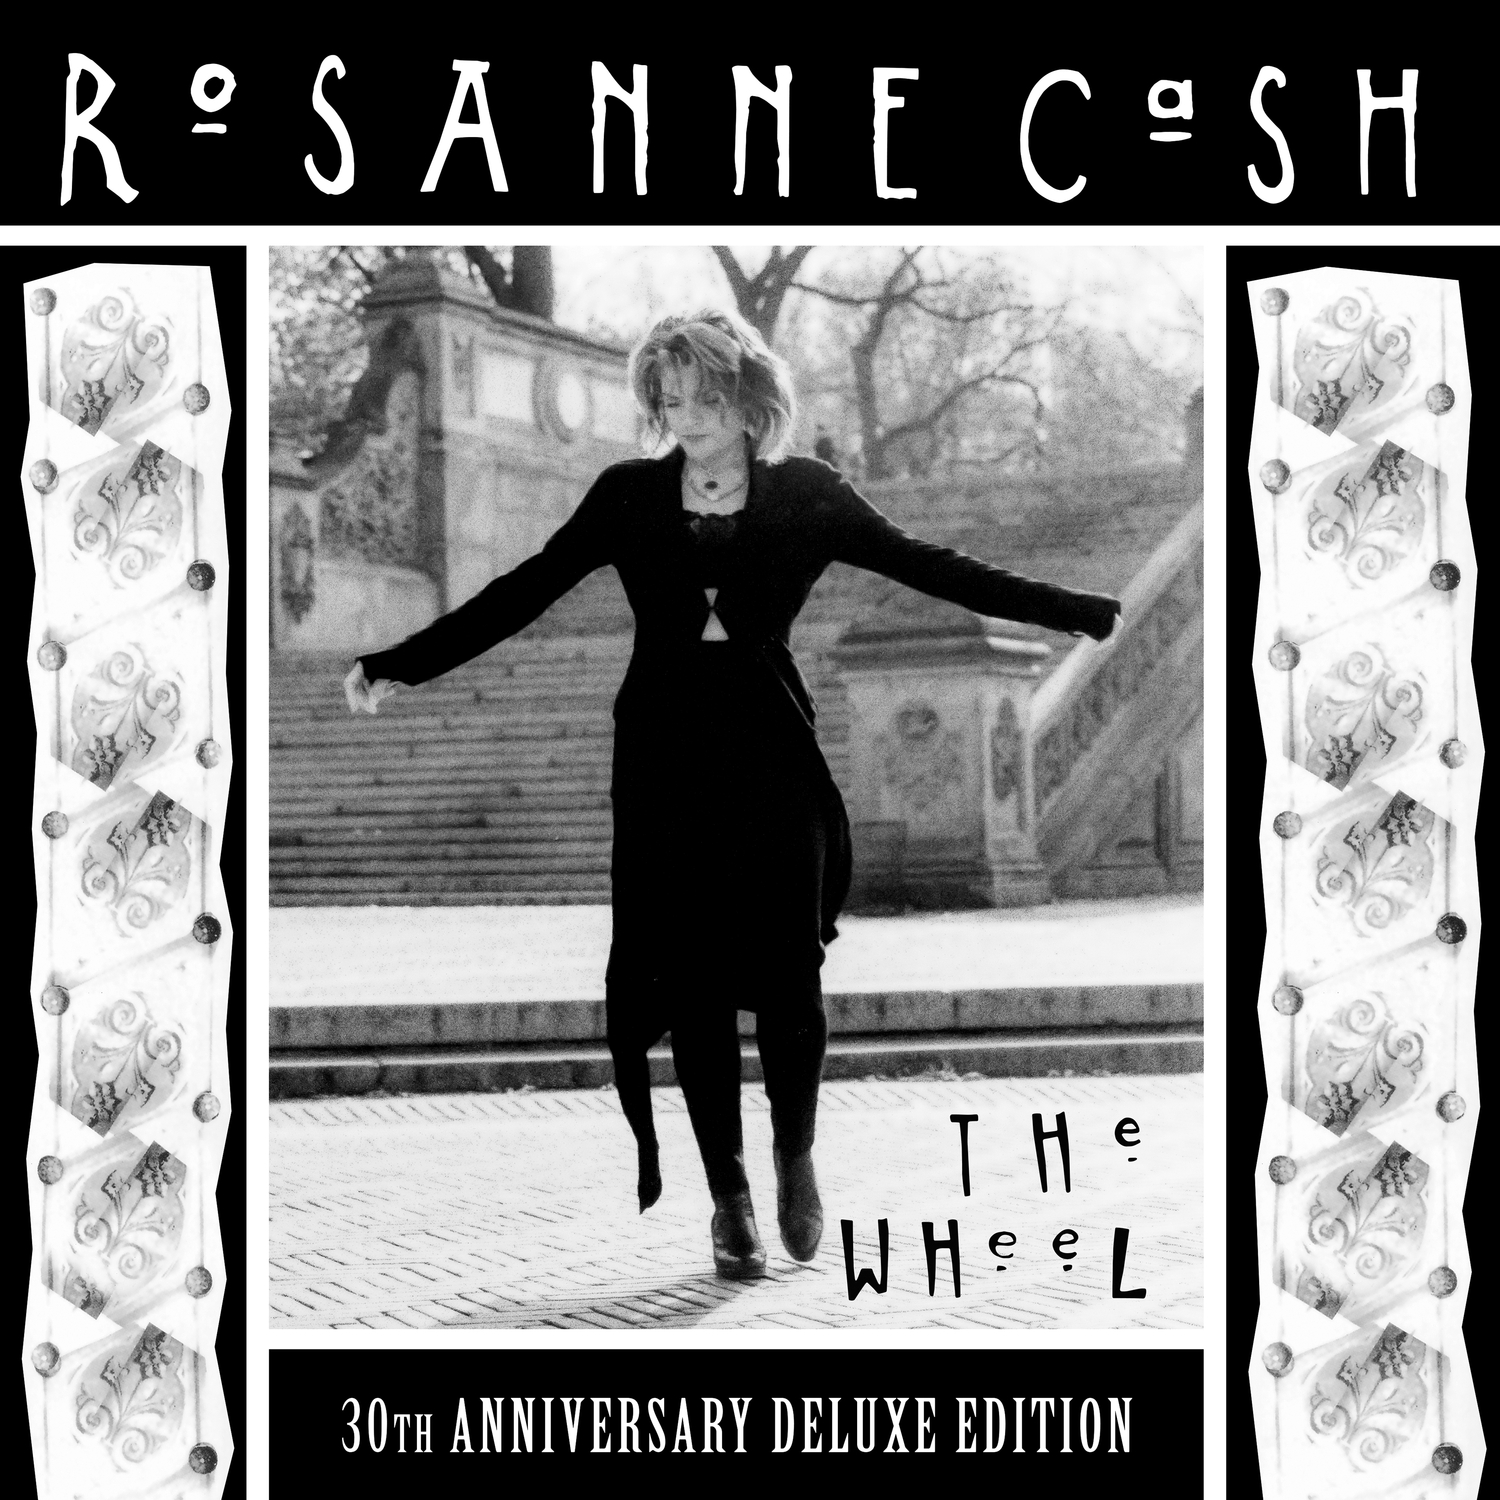 Rosanne Cash - The Wheel  (30th Anniversary Deluxe Edition) (2023) [FLAC 24bit/96kHz] Download